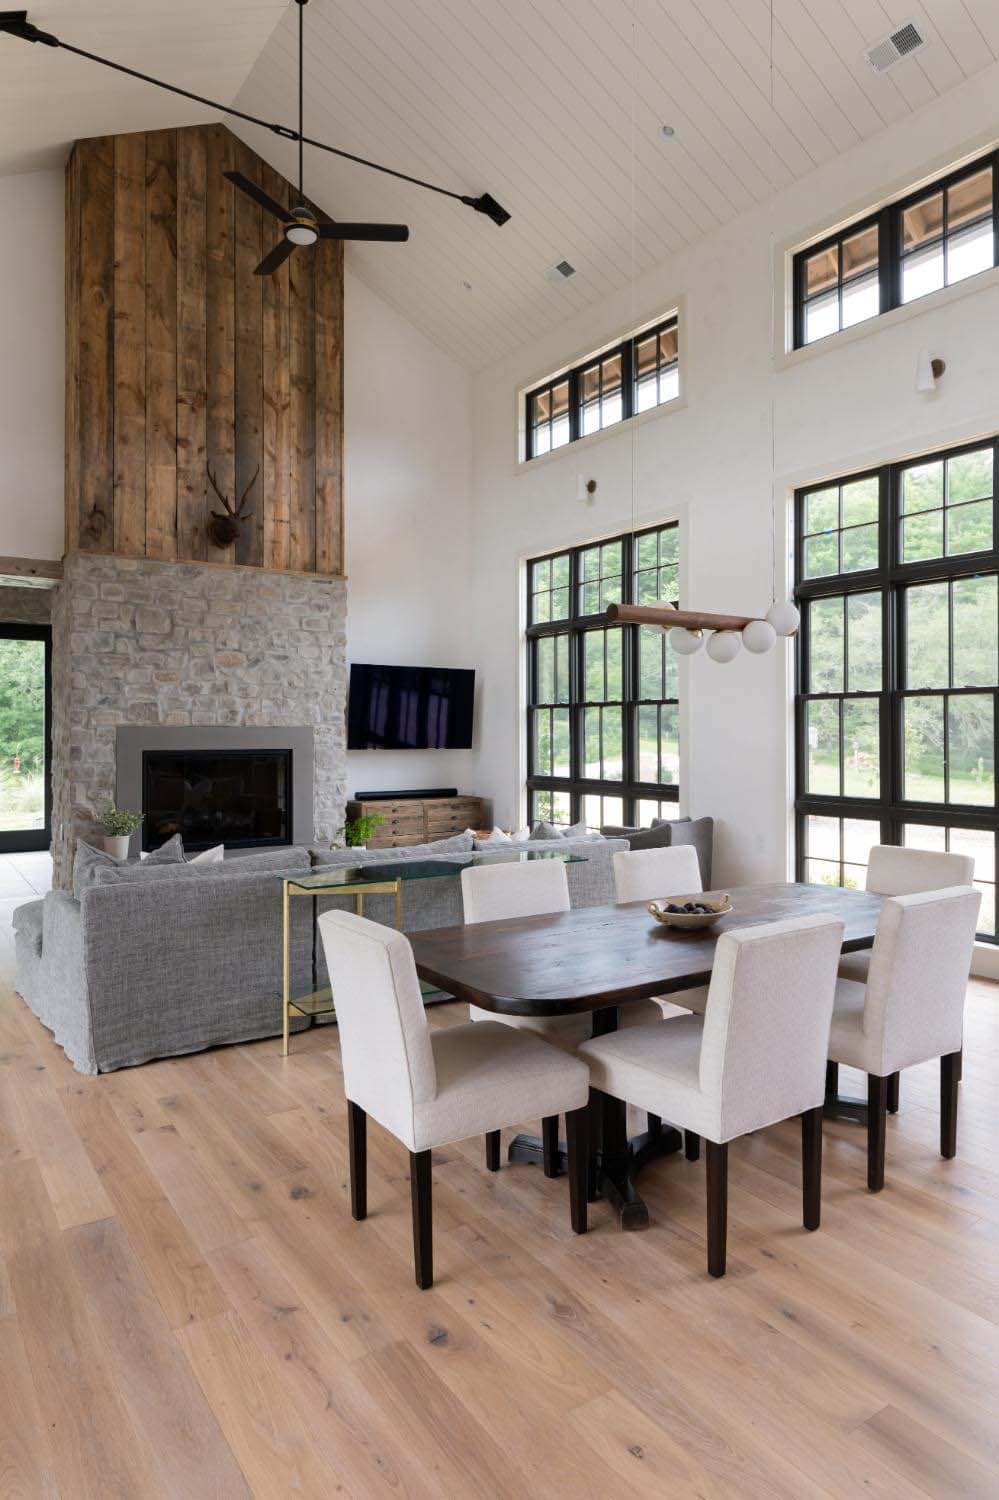 English modern style dining room with a fireplace